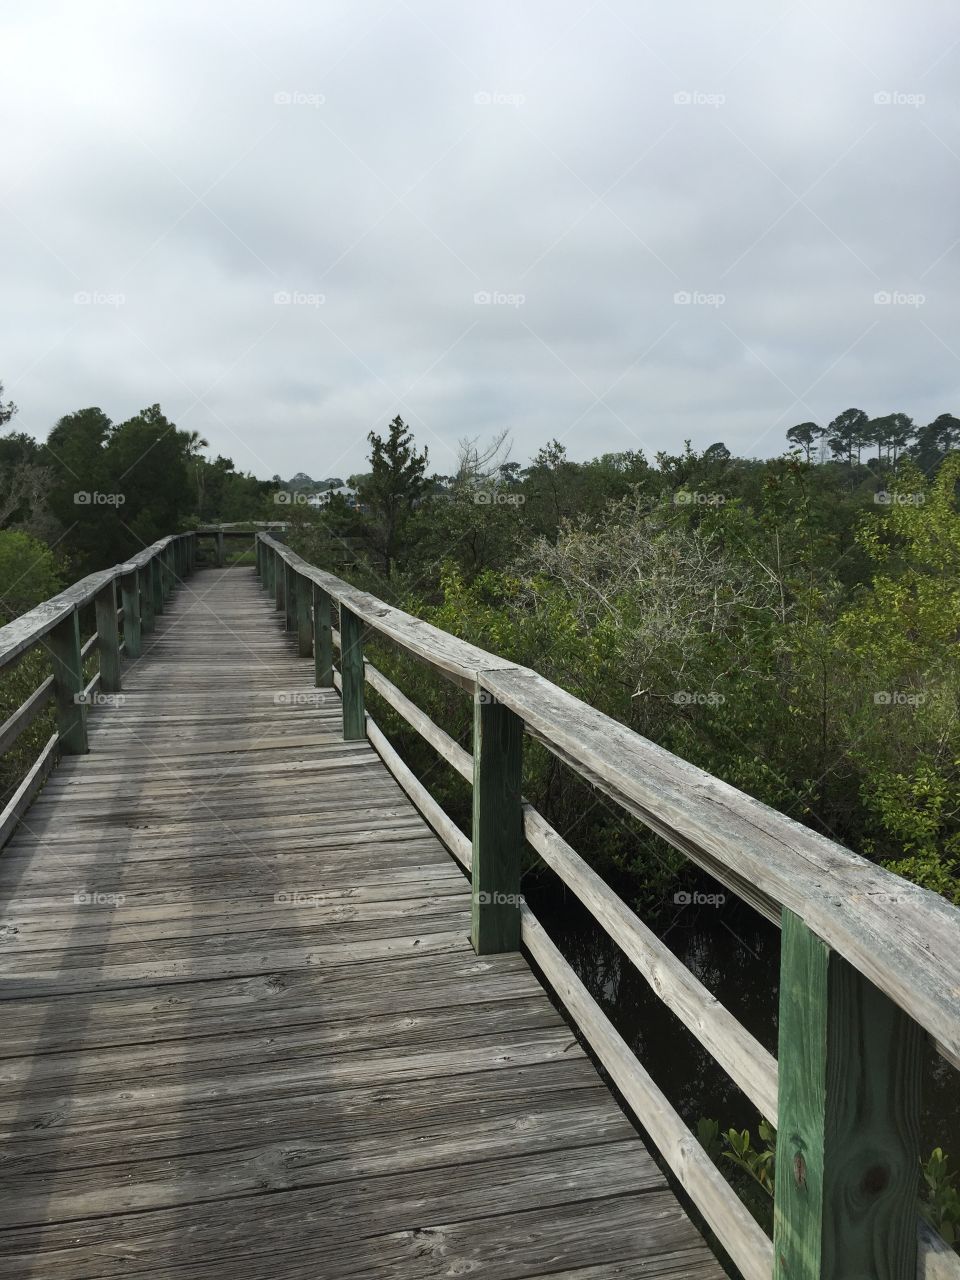 Florida park with Boardwalk in the rain.